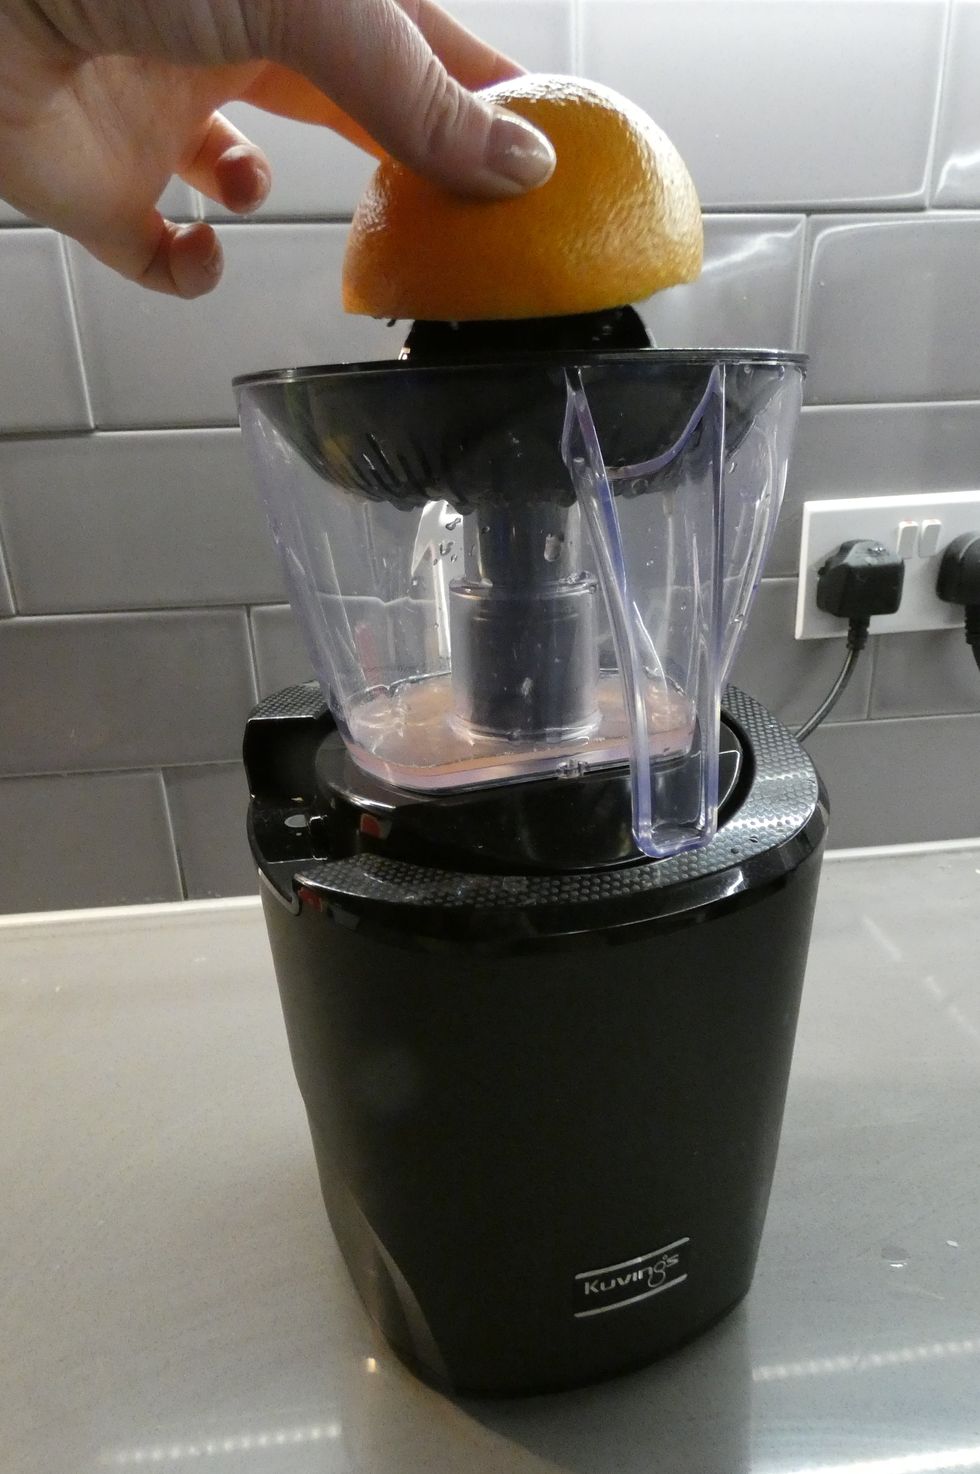 This 'Rolls Royce of juicers' can make smoothies, nut butters and more